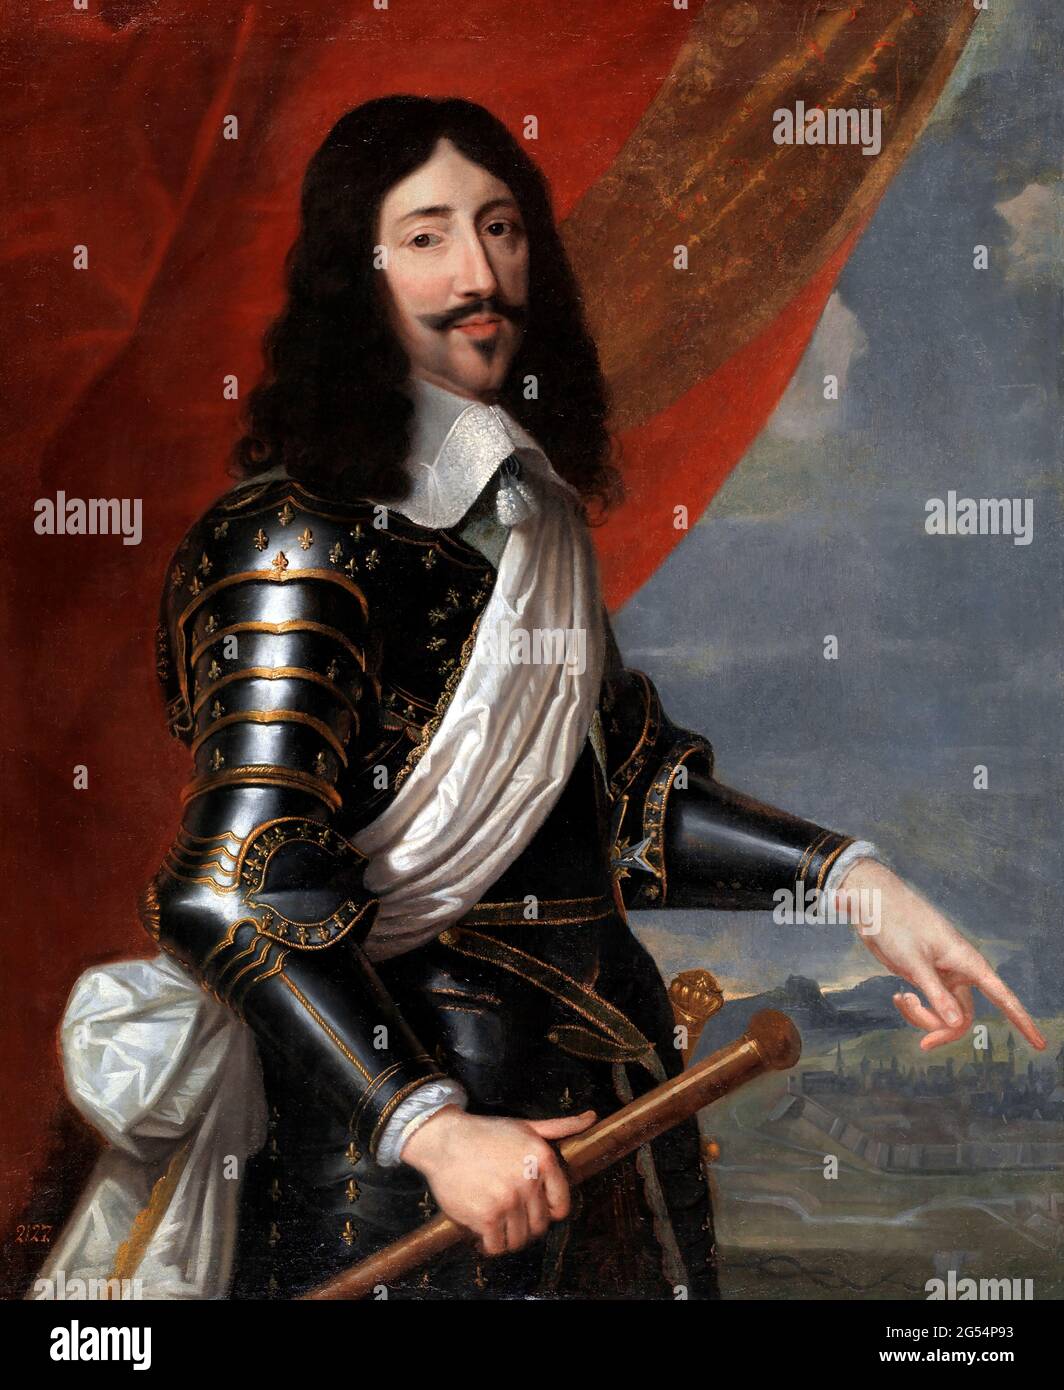 Louis XIII. Portrait of King Louis XIII of France (1601-1643) by the workshop of Philippe de Champaigne (1602-1674), oil on canvas, 17th Century Stock Photo